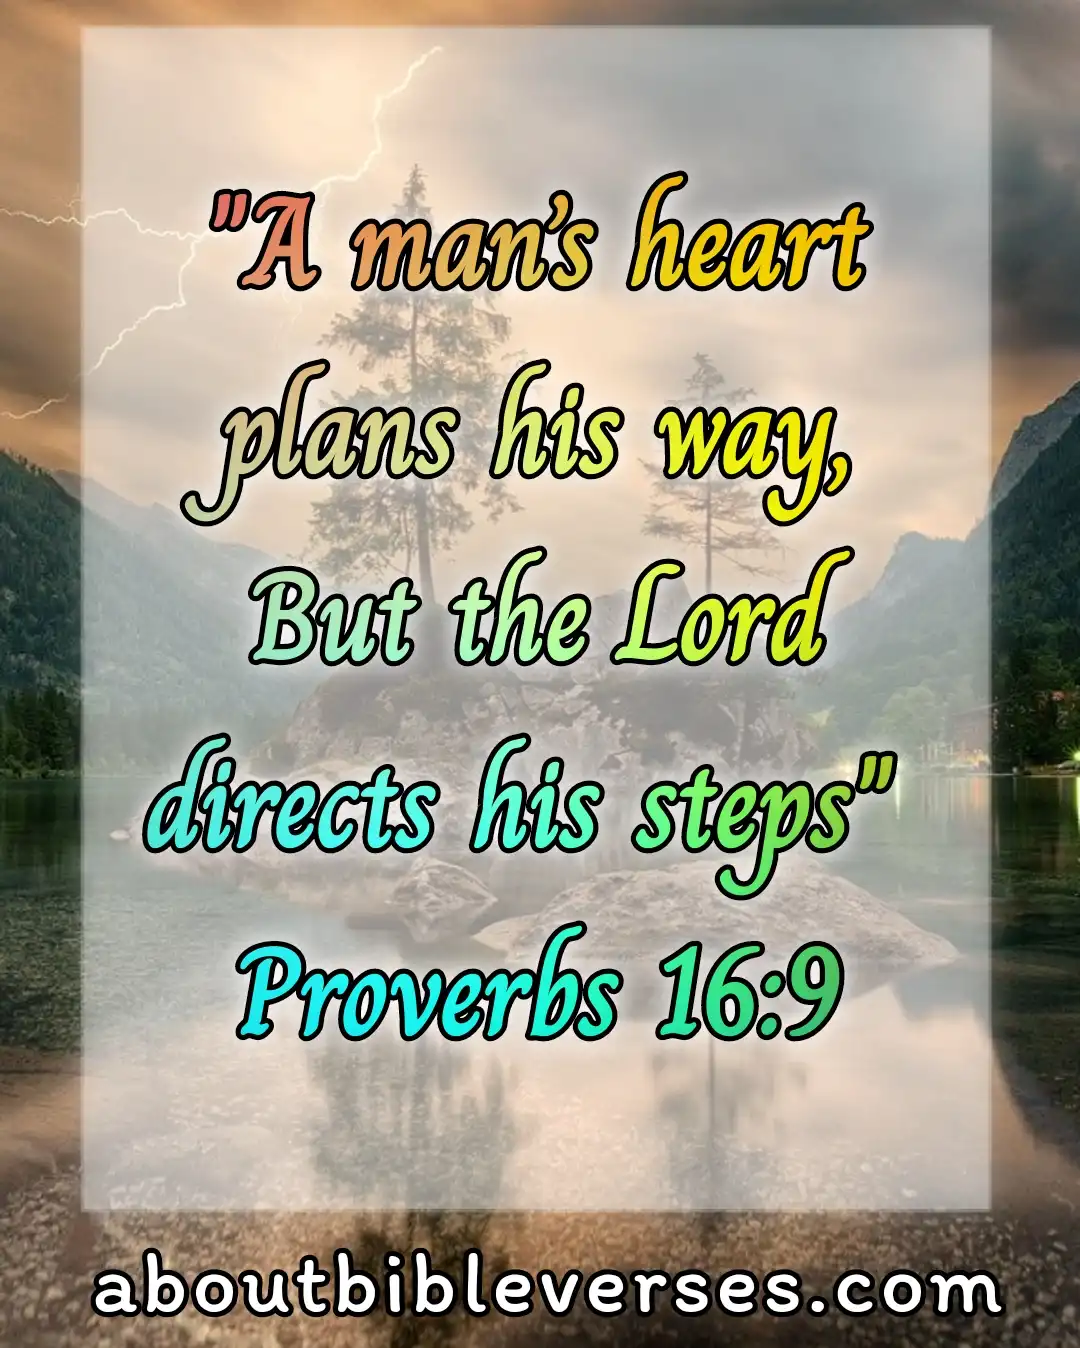 Bible verses about God's plans (Proverbs 16:9)